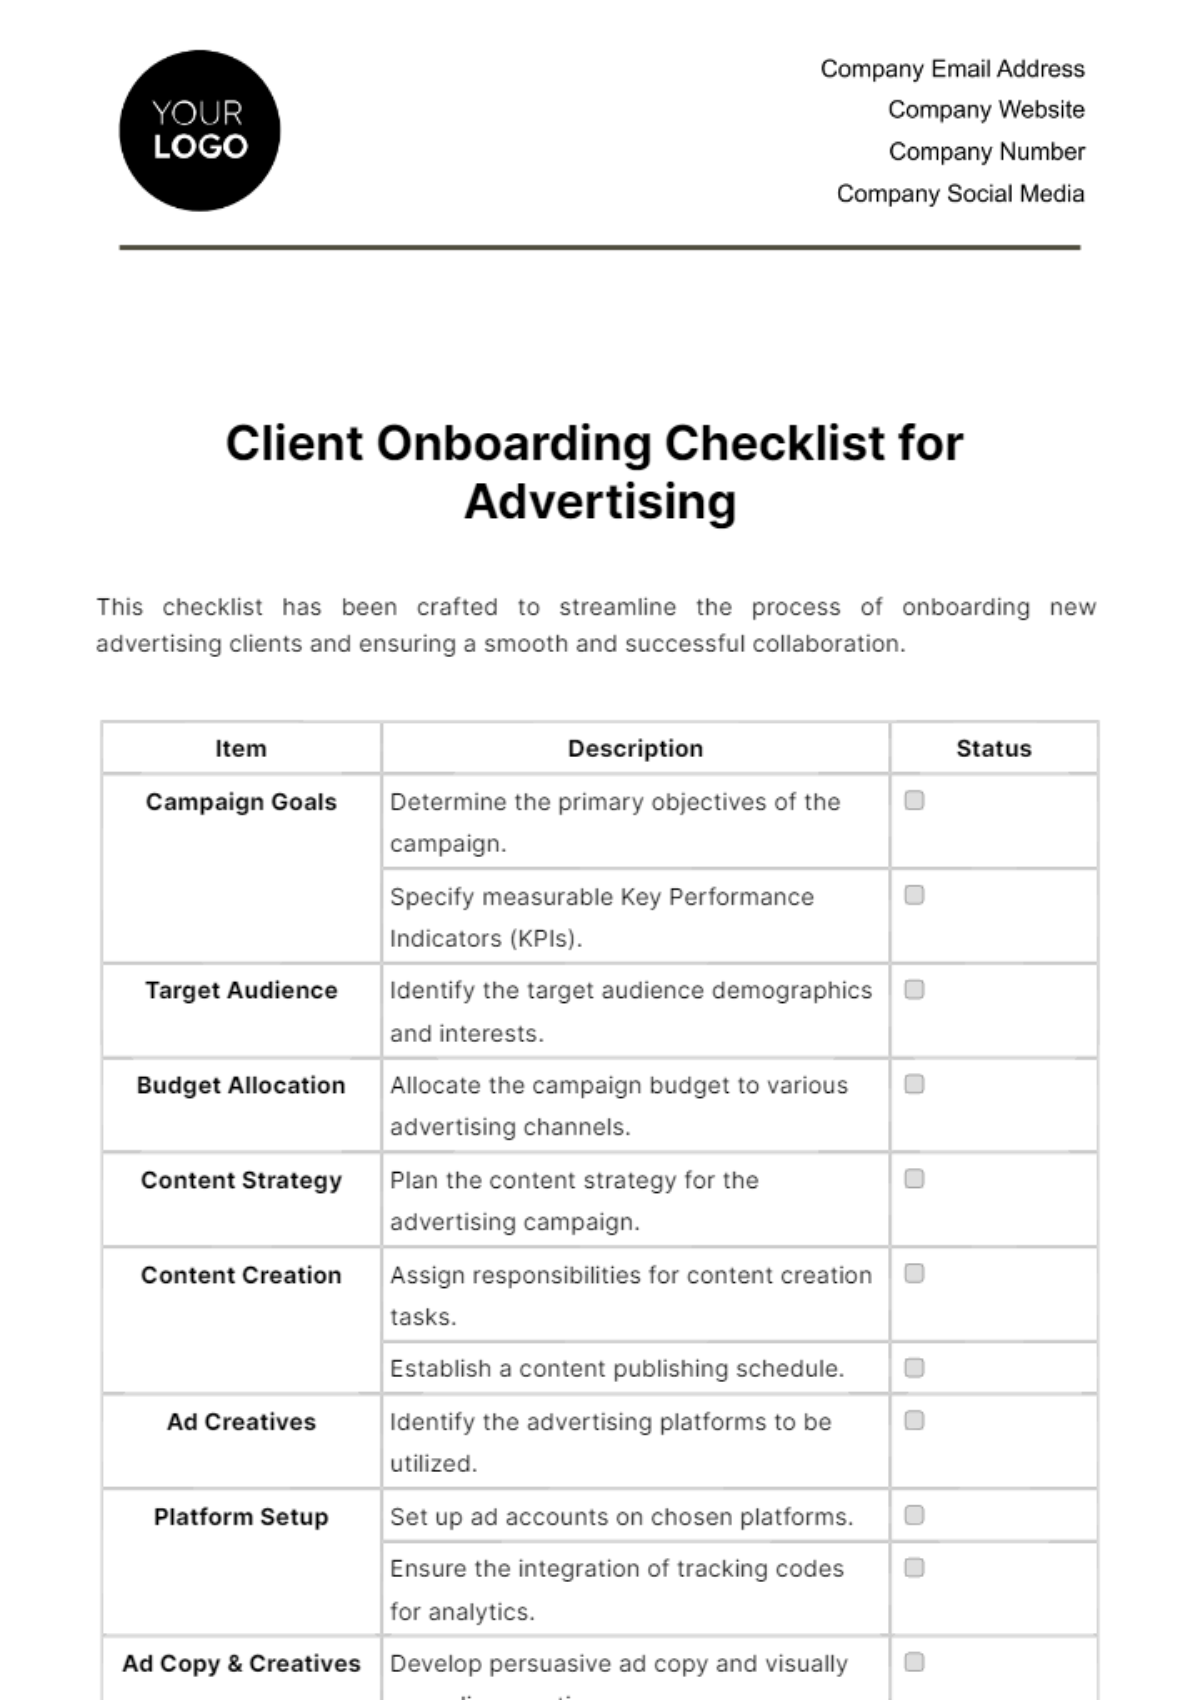 Free Client Onboarding Checklist for Advertising Template